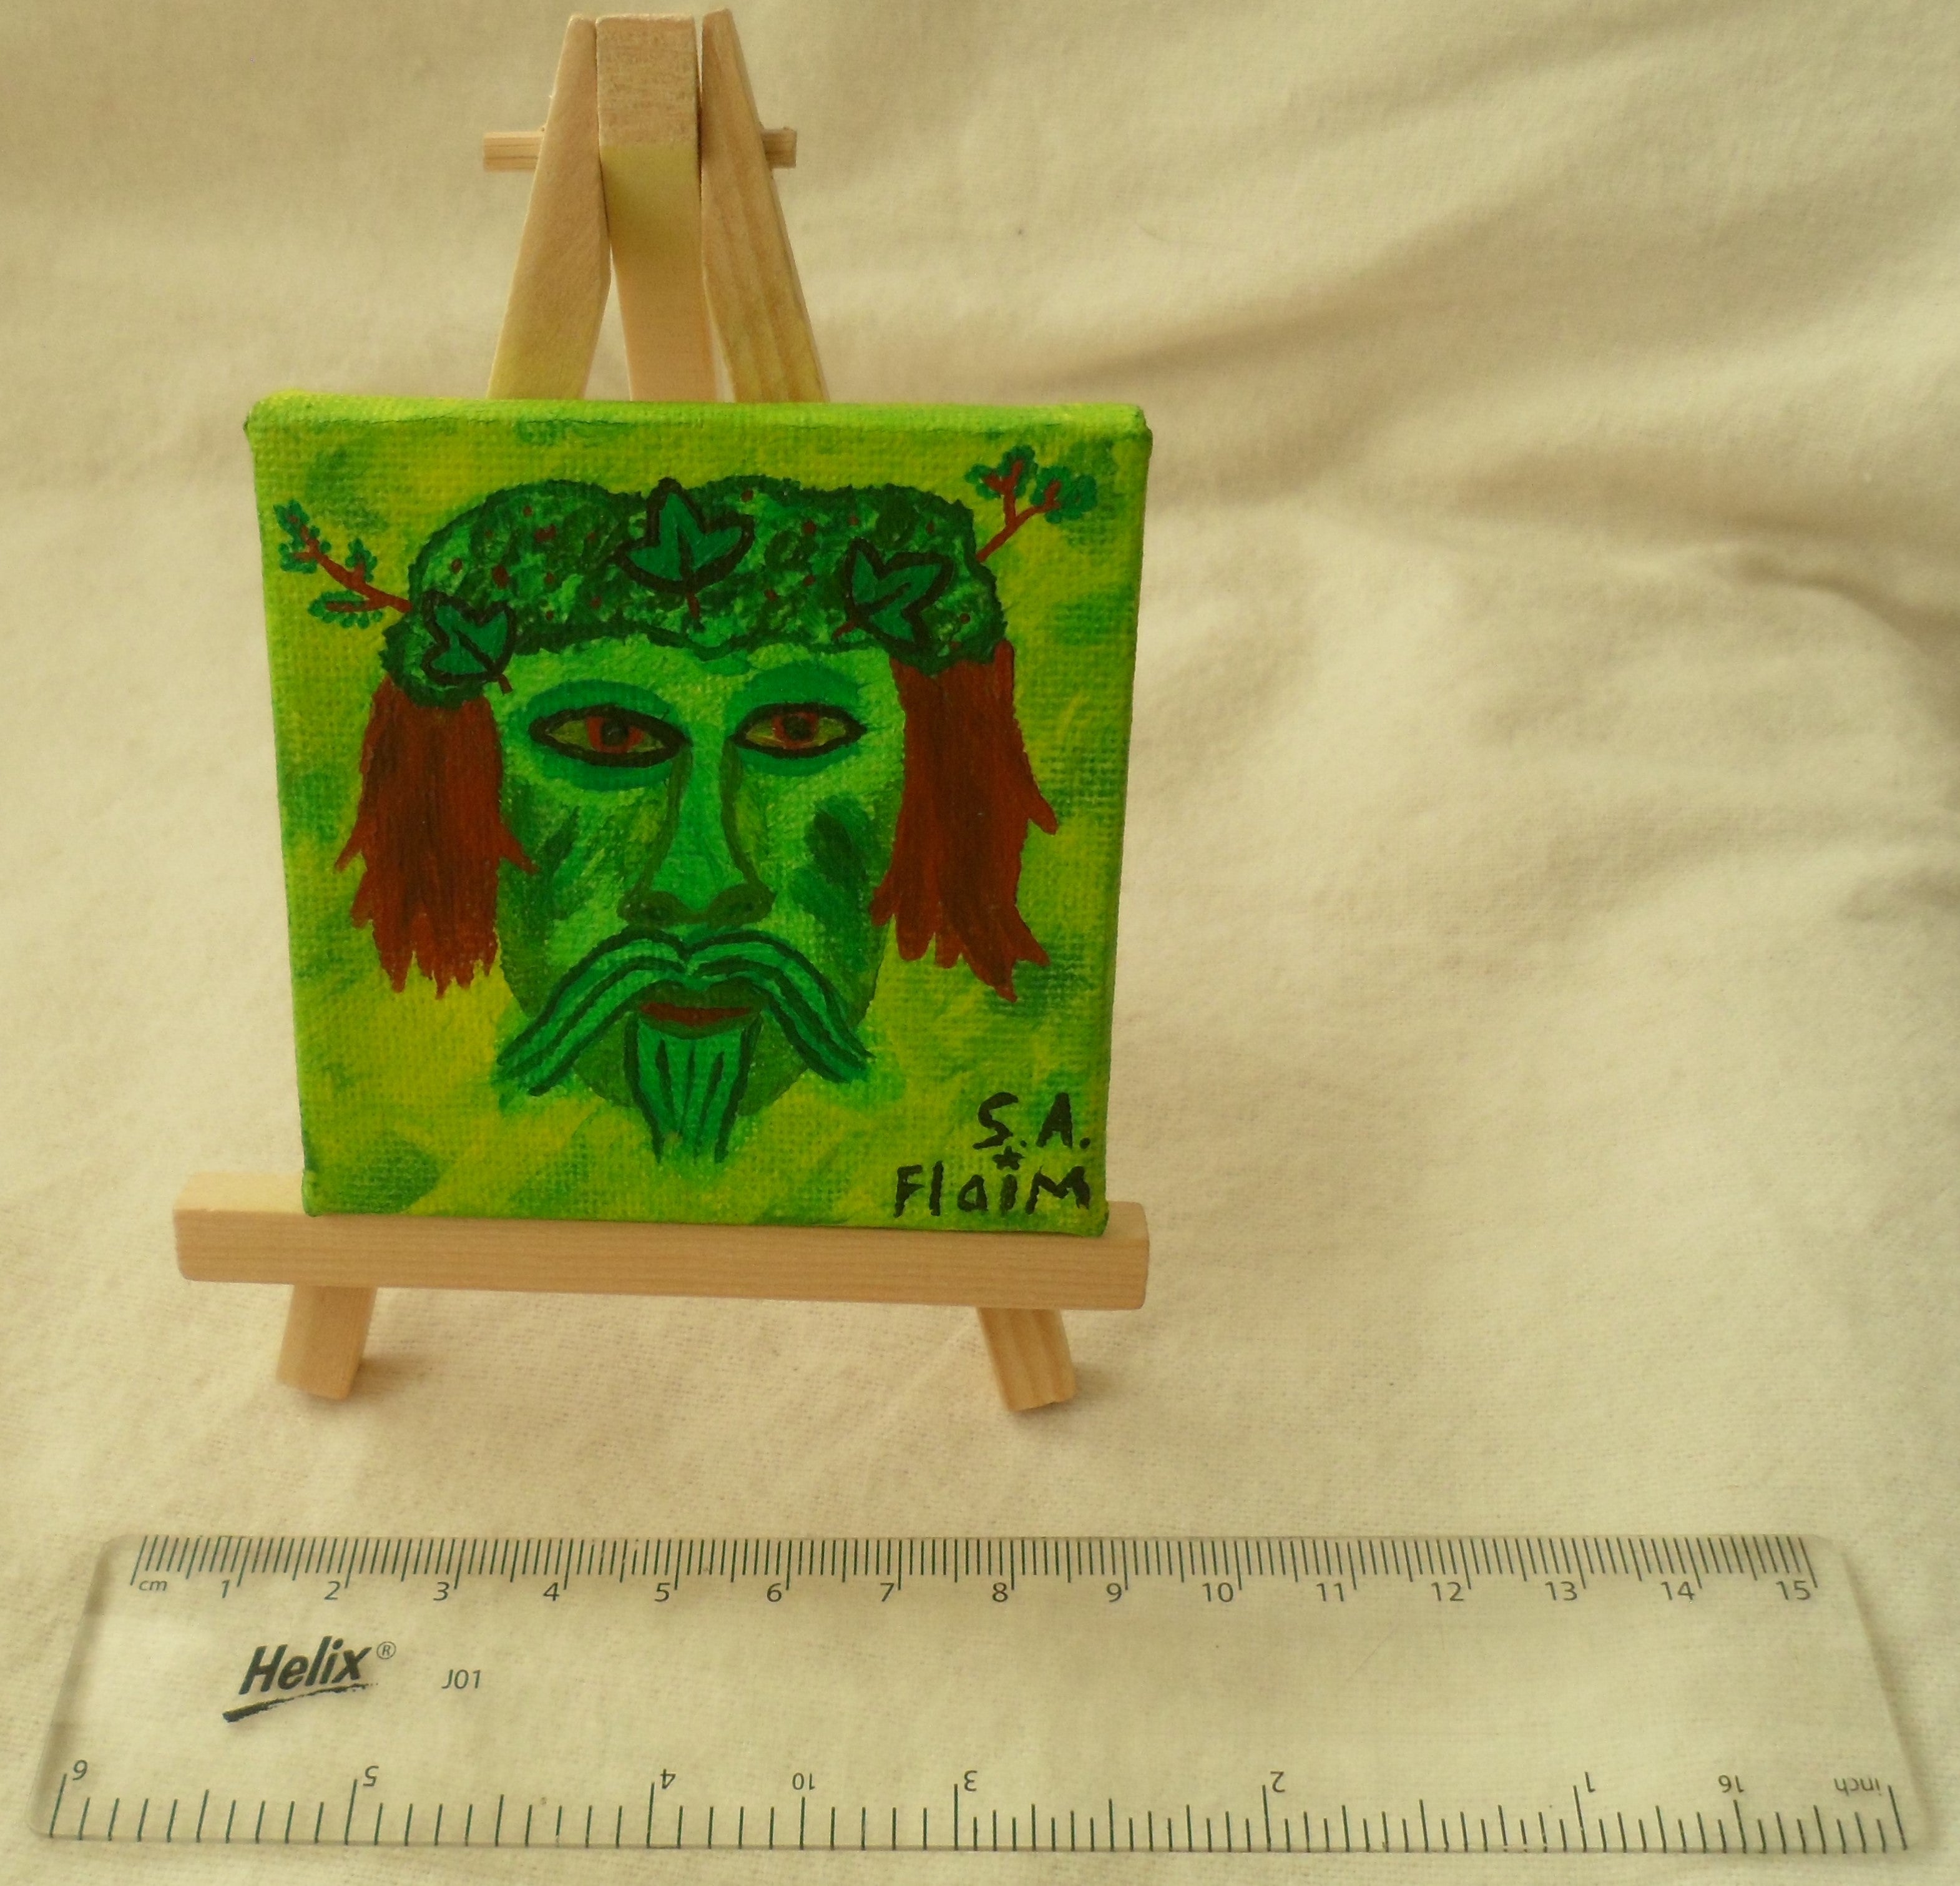 Green Man Mini Easel Art by S.A.Flaim - Tully Crafts